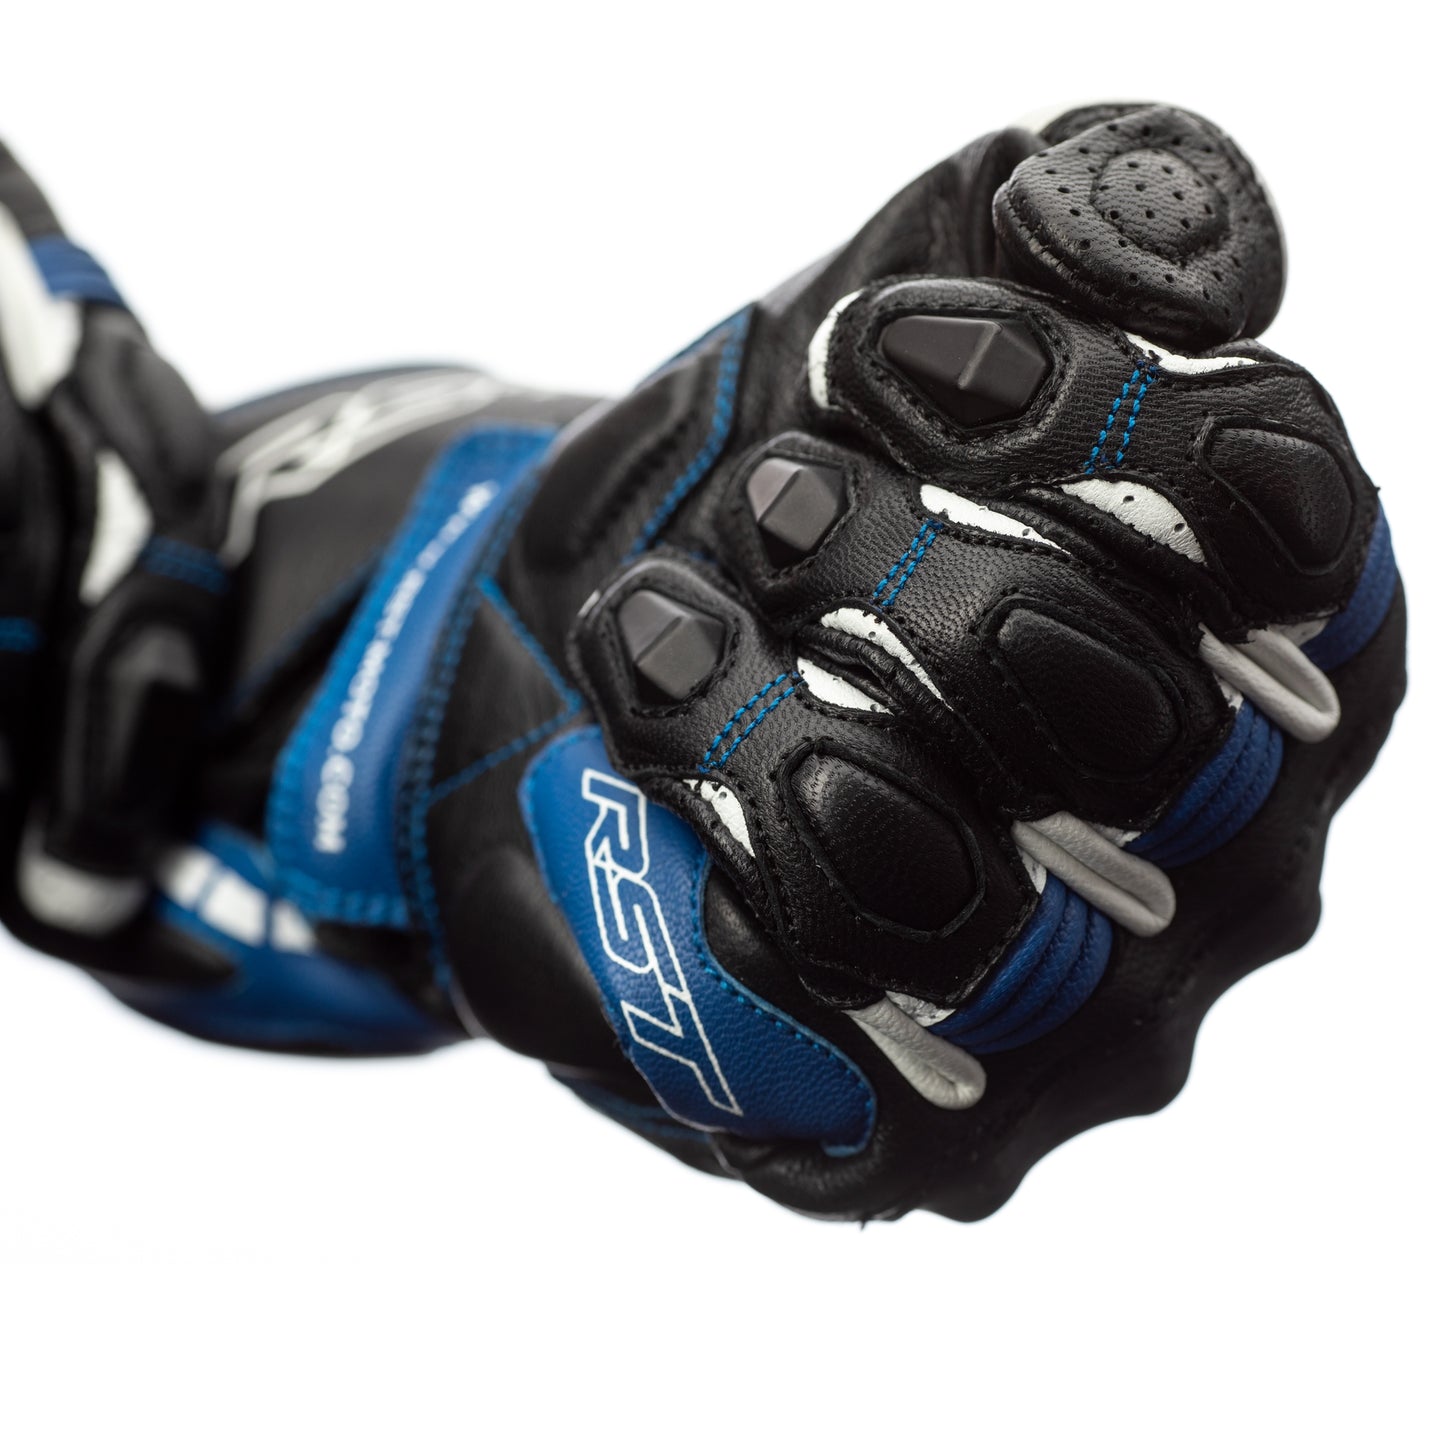 RST Axis Leather Riding Gloves - CE APPROVED - Blue